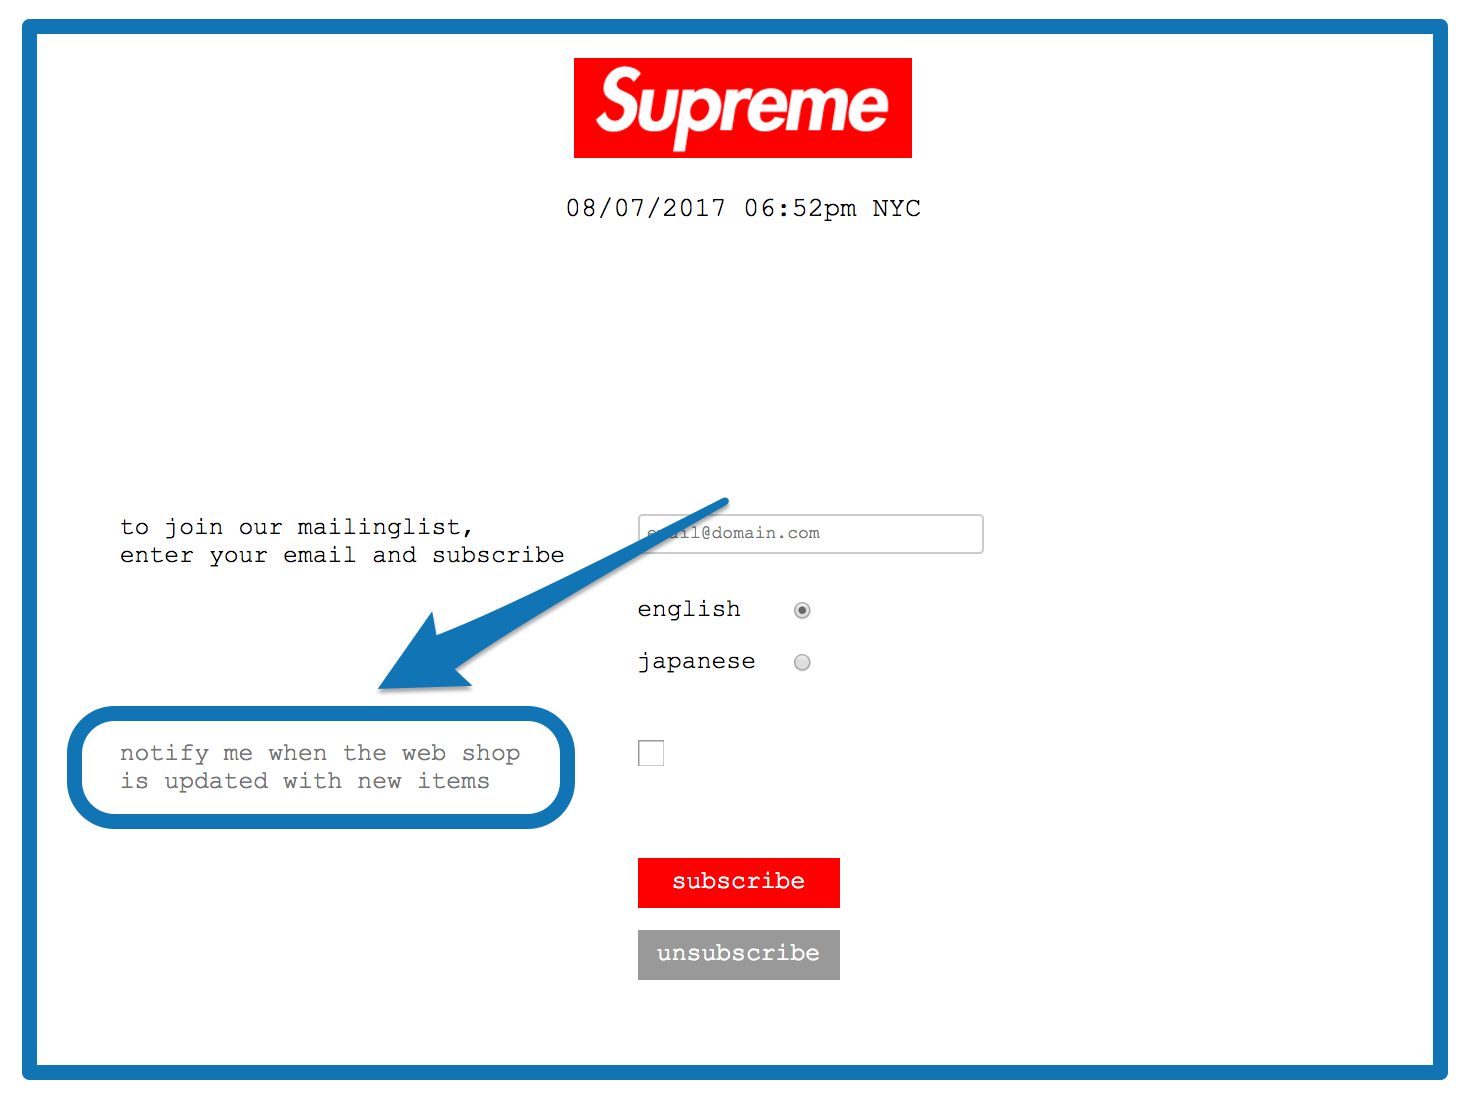 Screenshot showing the "notify me" option on Supreme